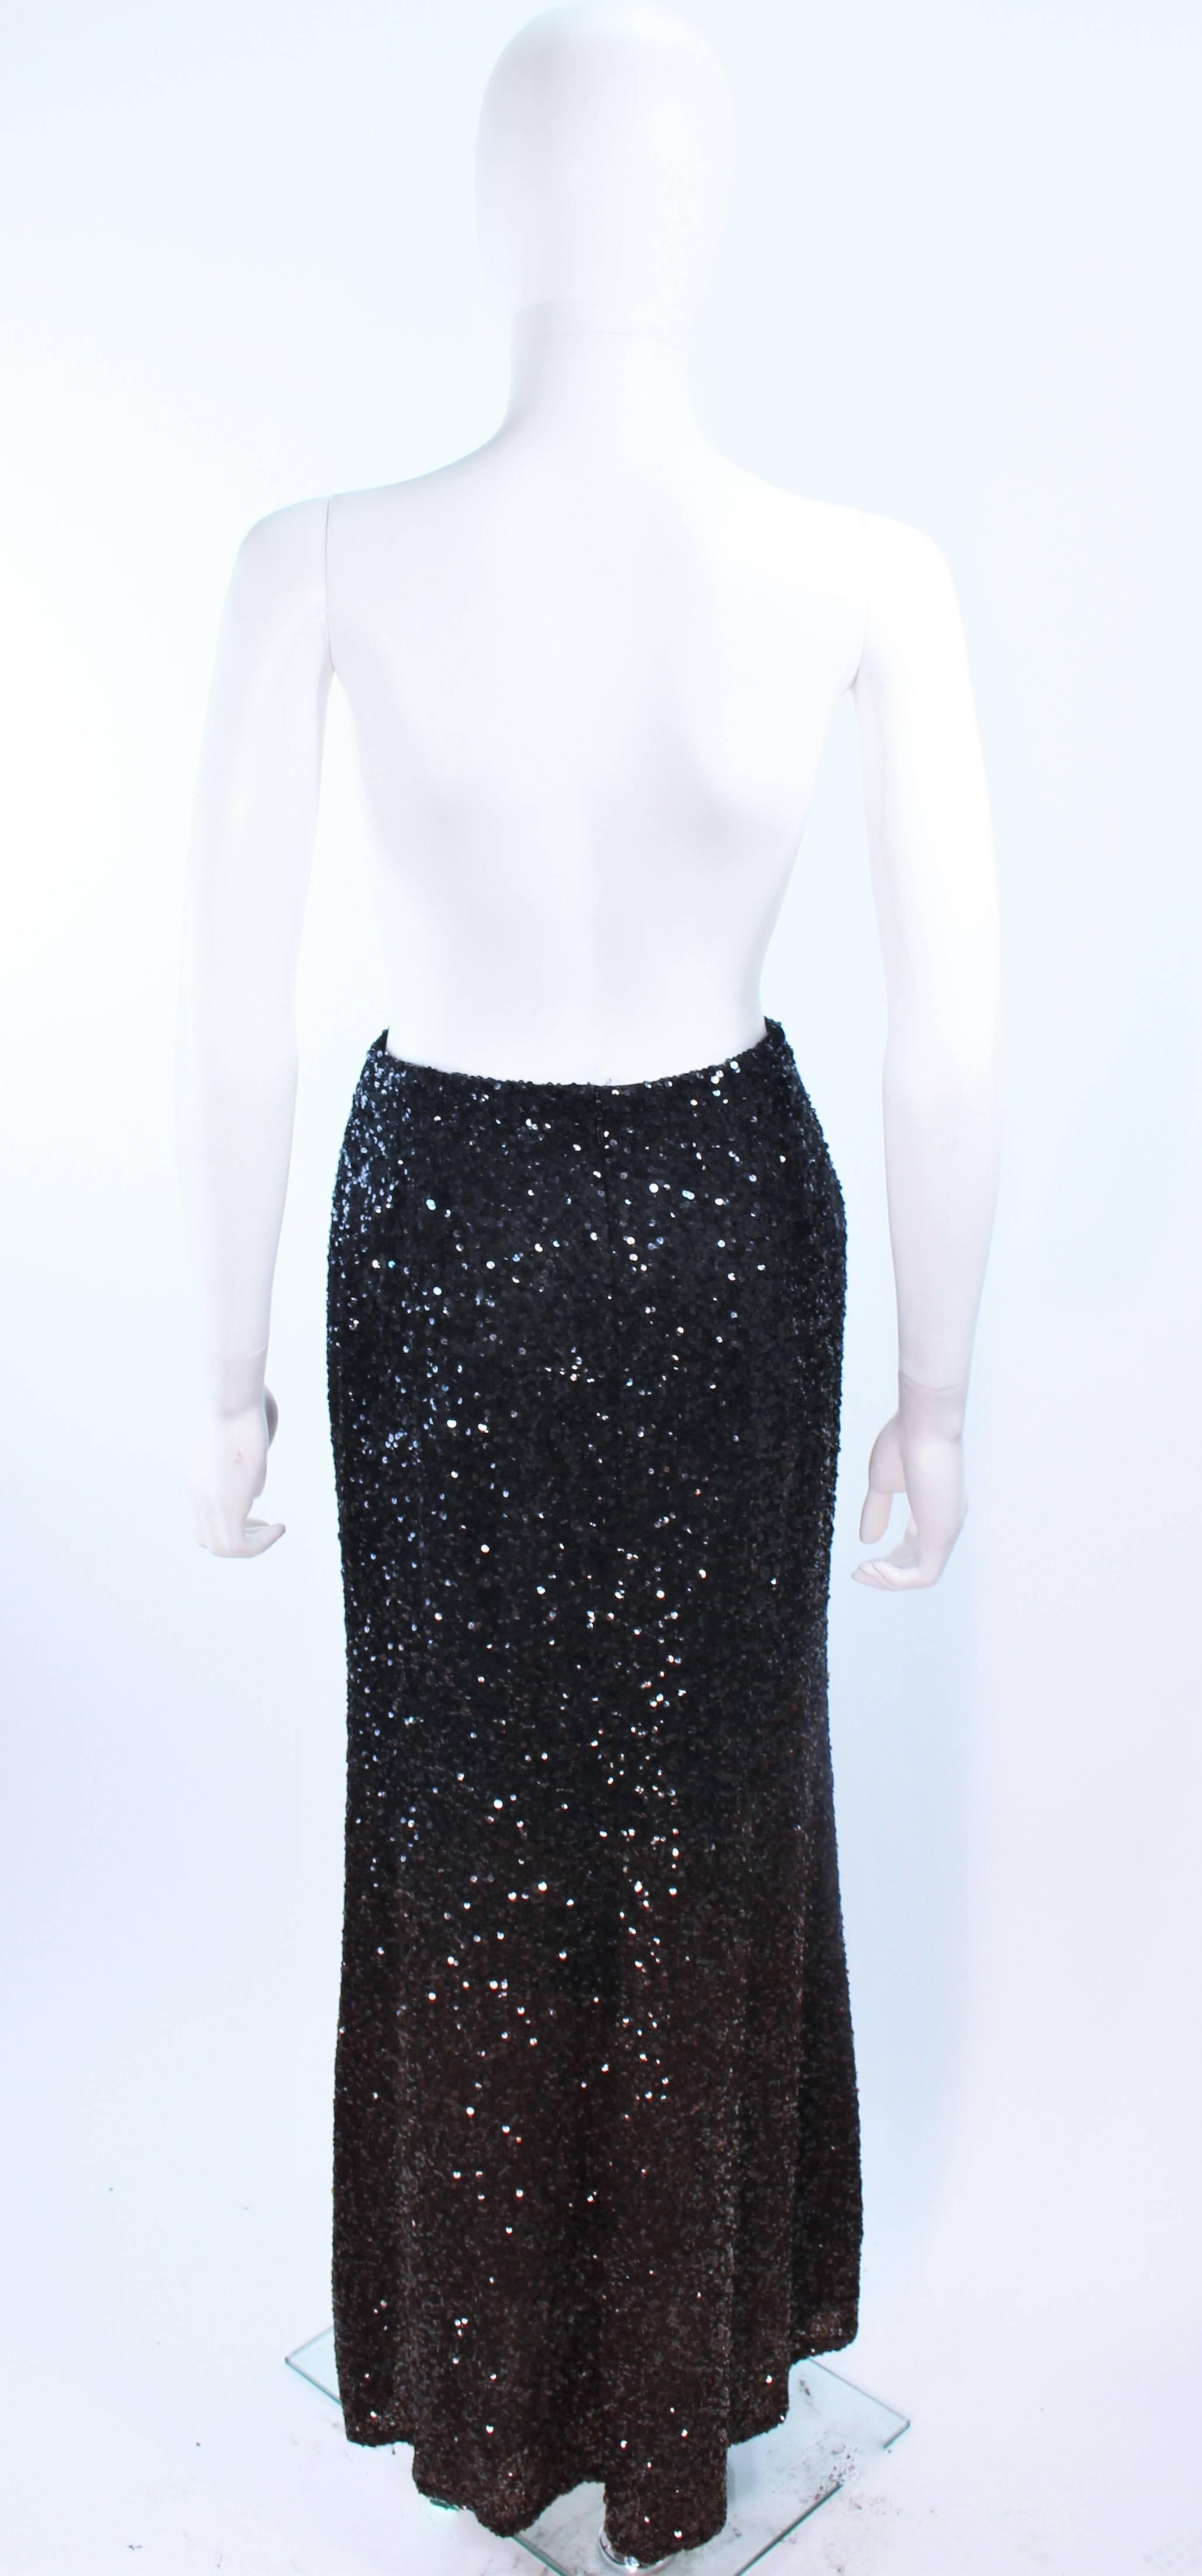 BILL BLASS Black and Brown Sequin Ombre Skirt Size 6 For Sale 1